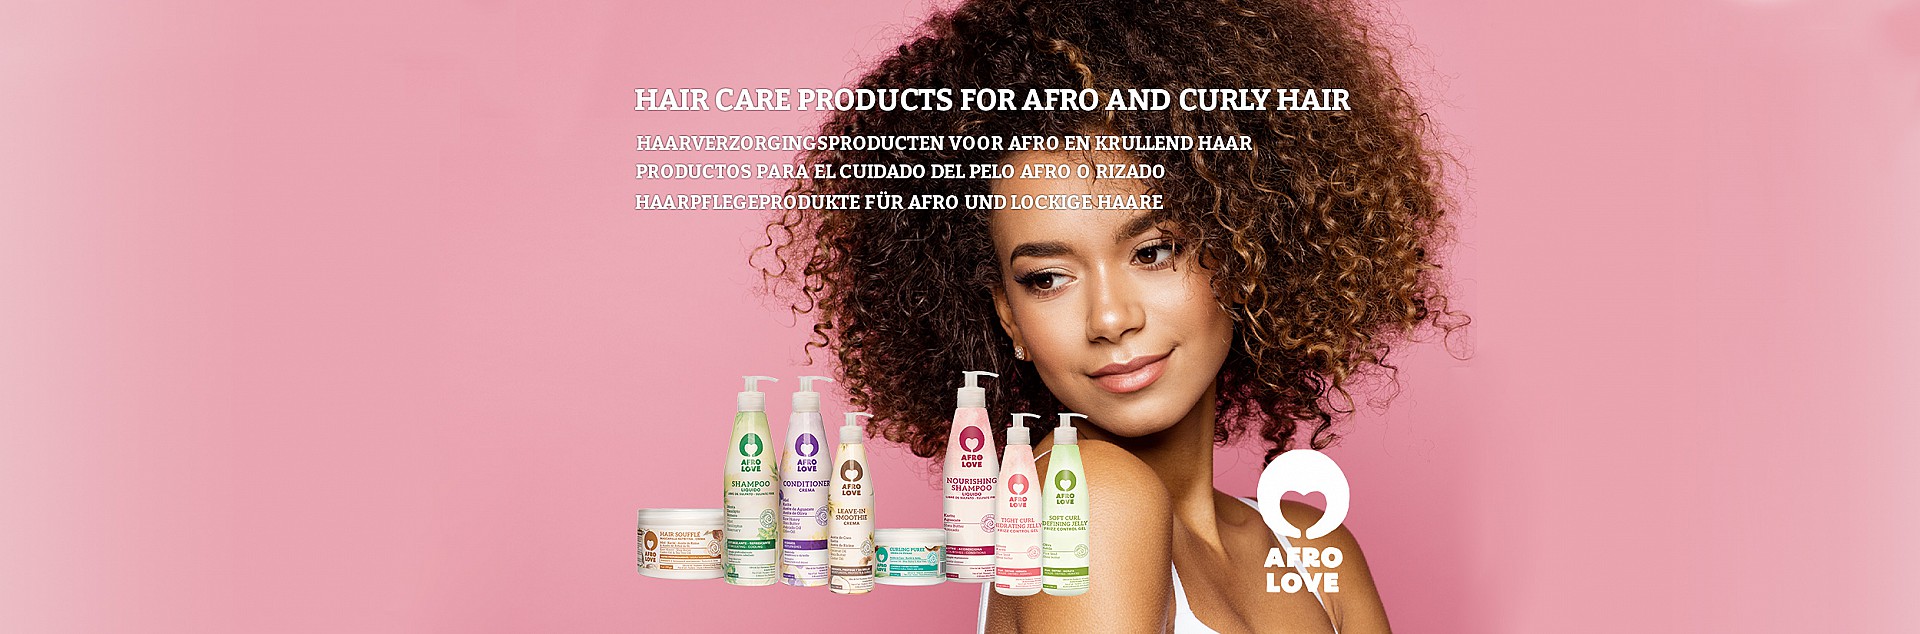 afro hair care products